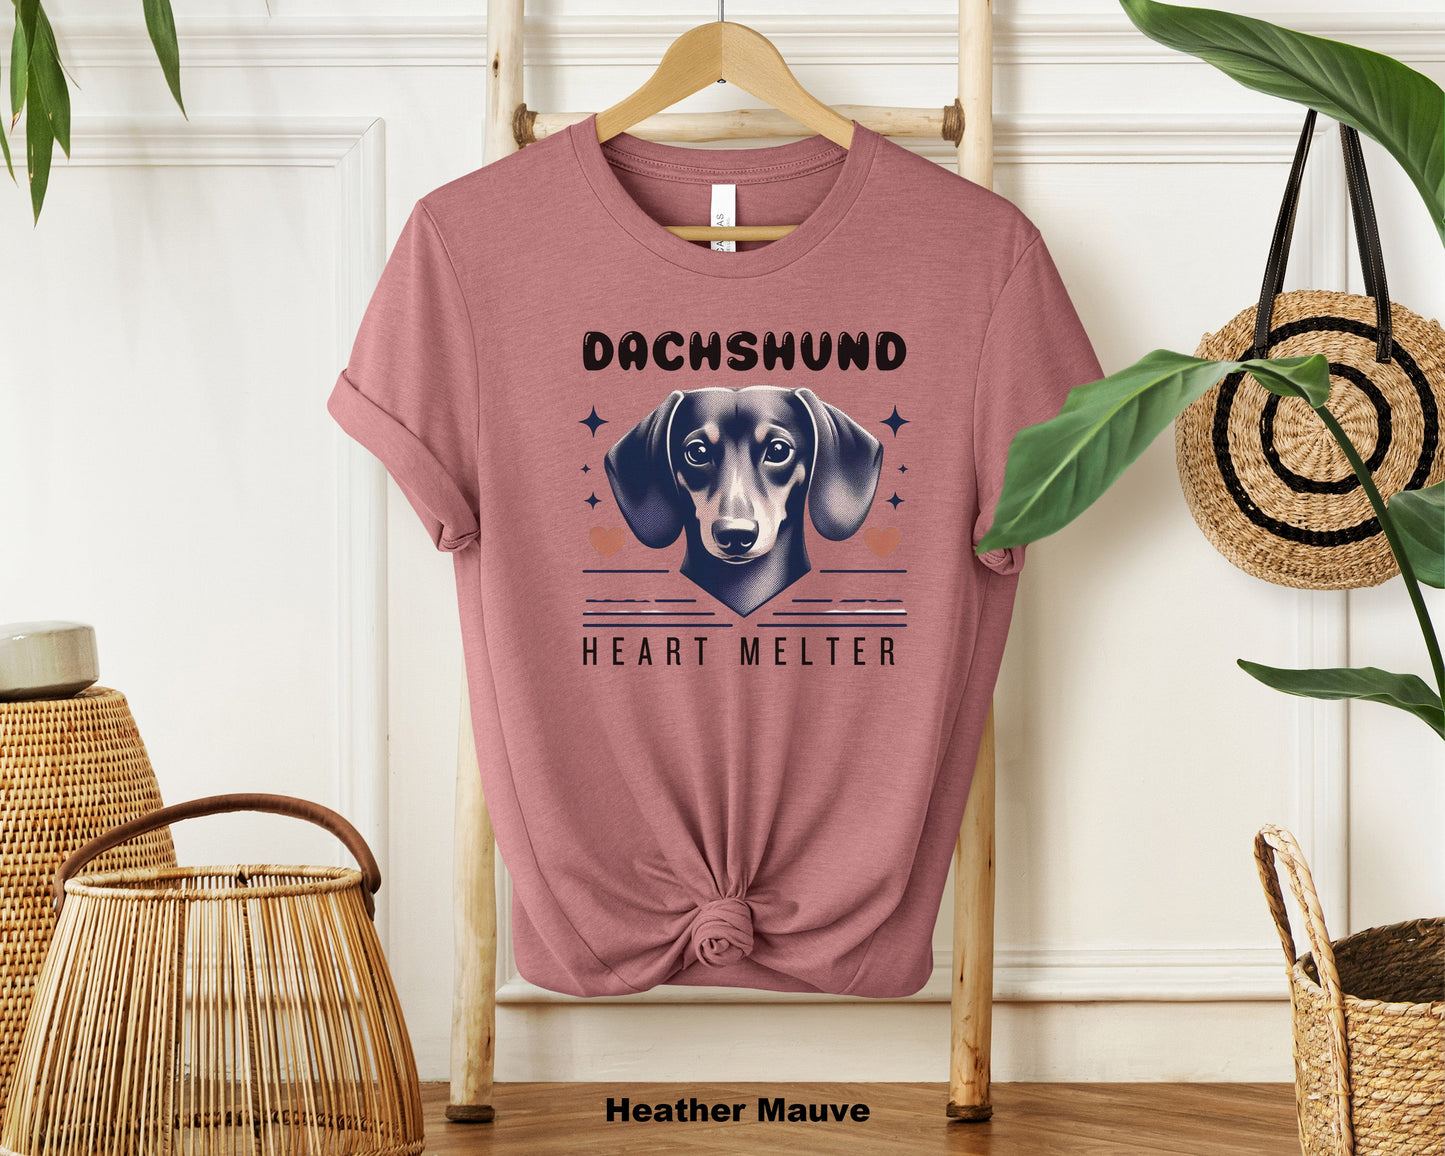 Dachshund Heart Melter Unisex Cotton T-Shirt - Retro Style Tee with Cute Dog Print